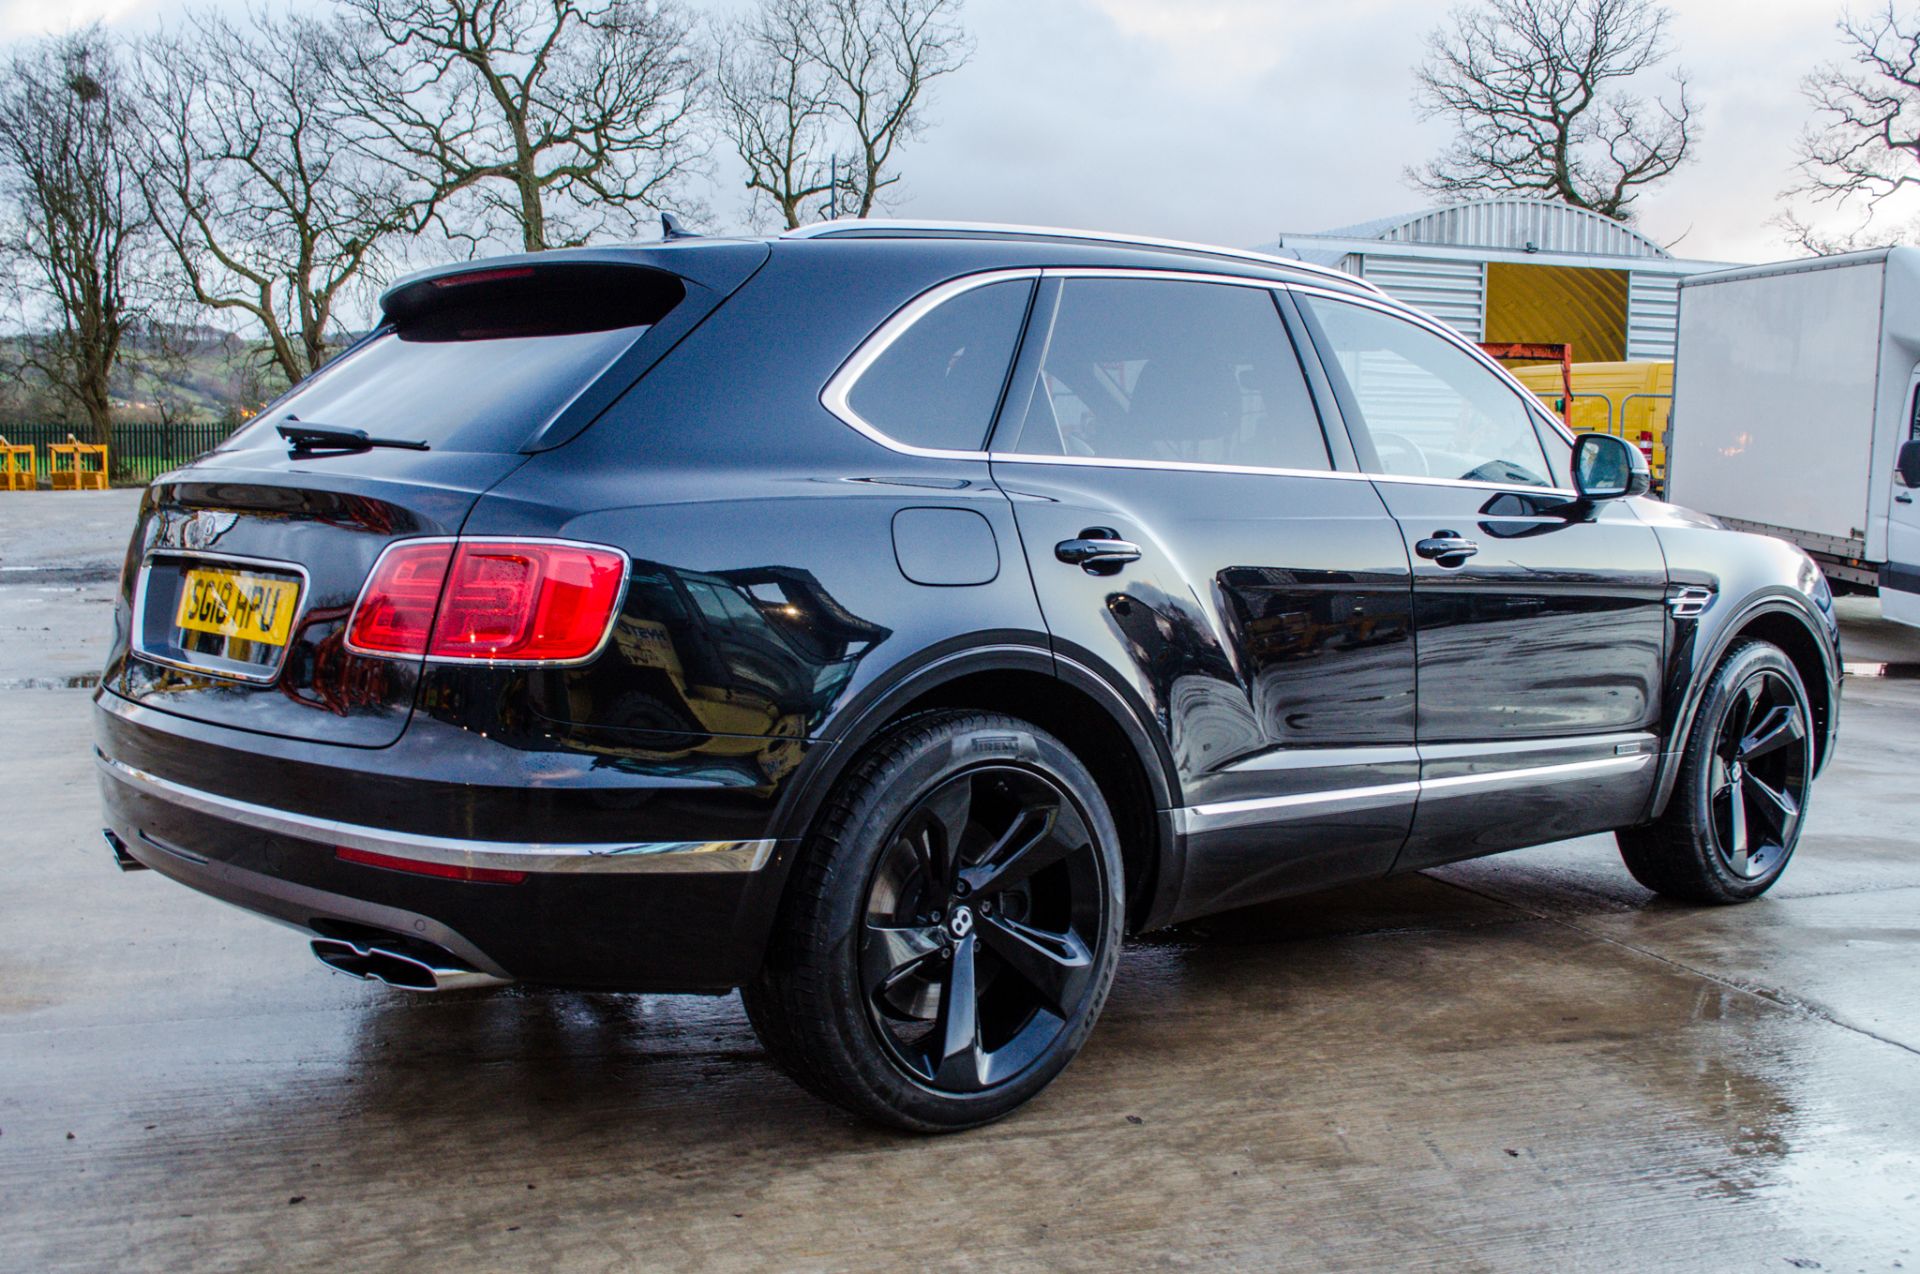 Bentley Bentayga 4.0 V8 diesel 4wd 7 seat SUV Reg No: SG 18 HPU Recorded Mileage: 37,650 Date of - Image 3 of 41